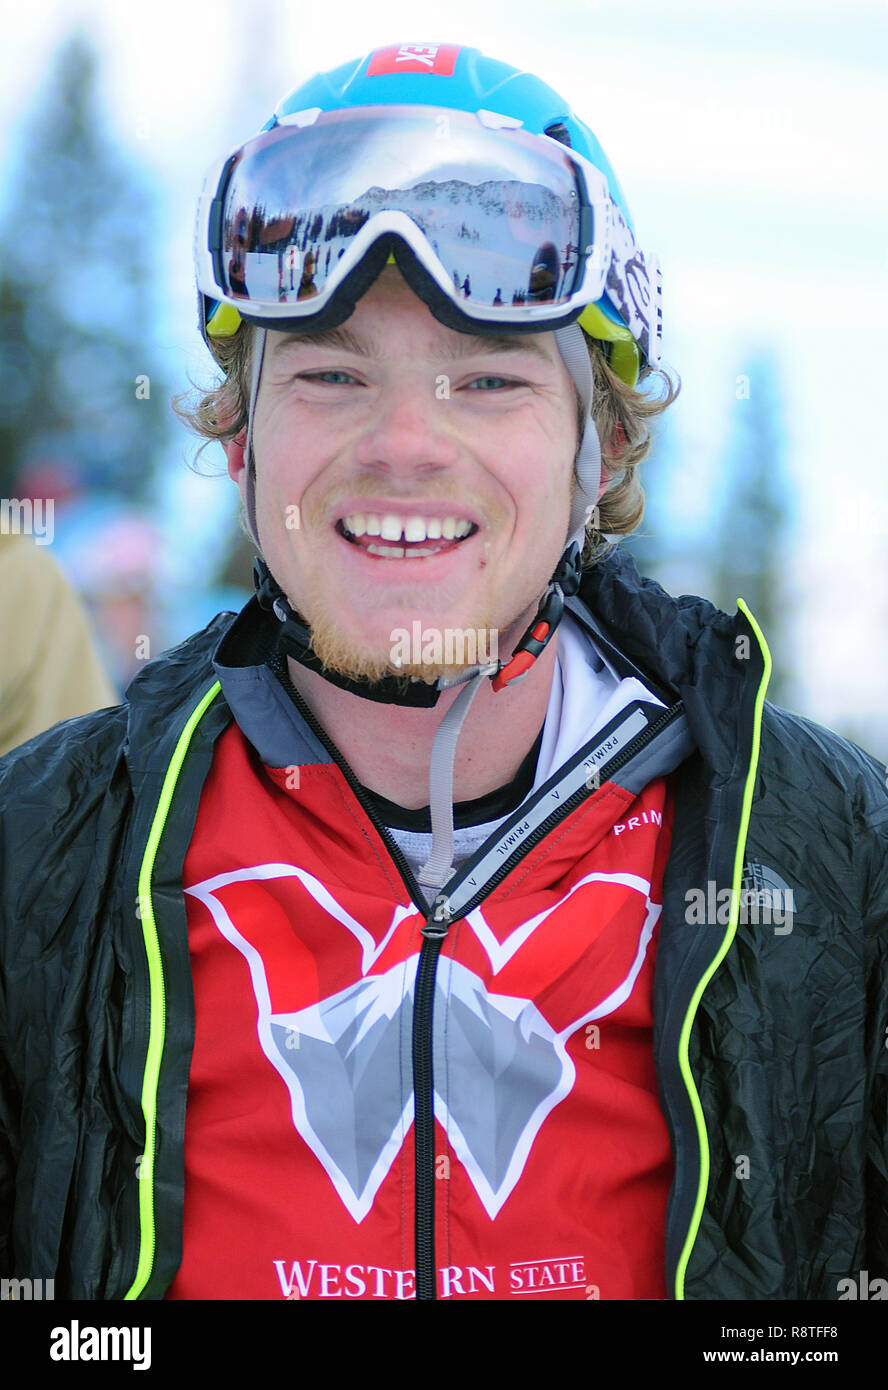 December 15, 2018: Western Colorado State University freshman, Jacob Dewy, following his U20 victory in the difficult United States Ski Mountaineering Association's Individual Race. Arapahoe Basin Ski Area, Dillon, Colorado. Stock Photo